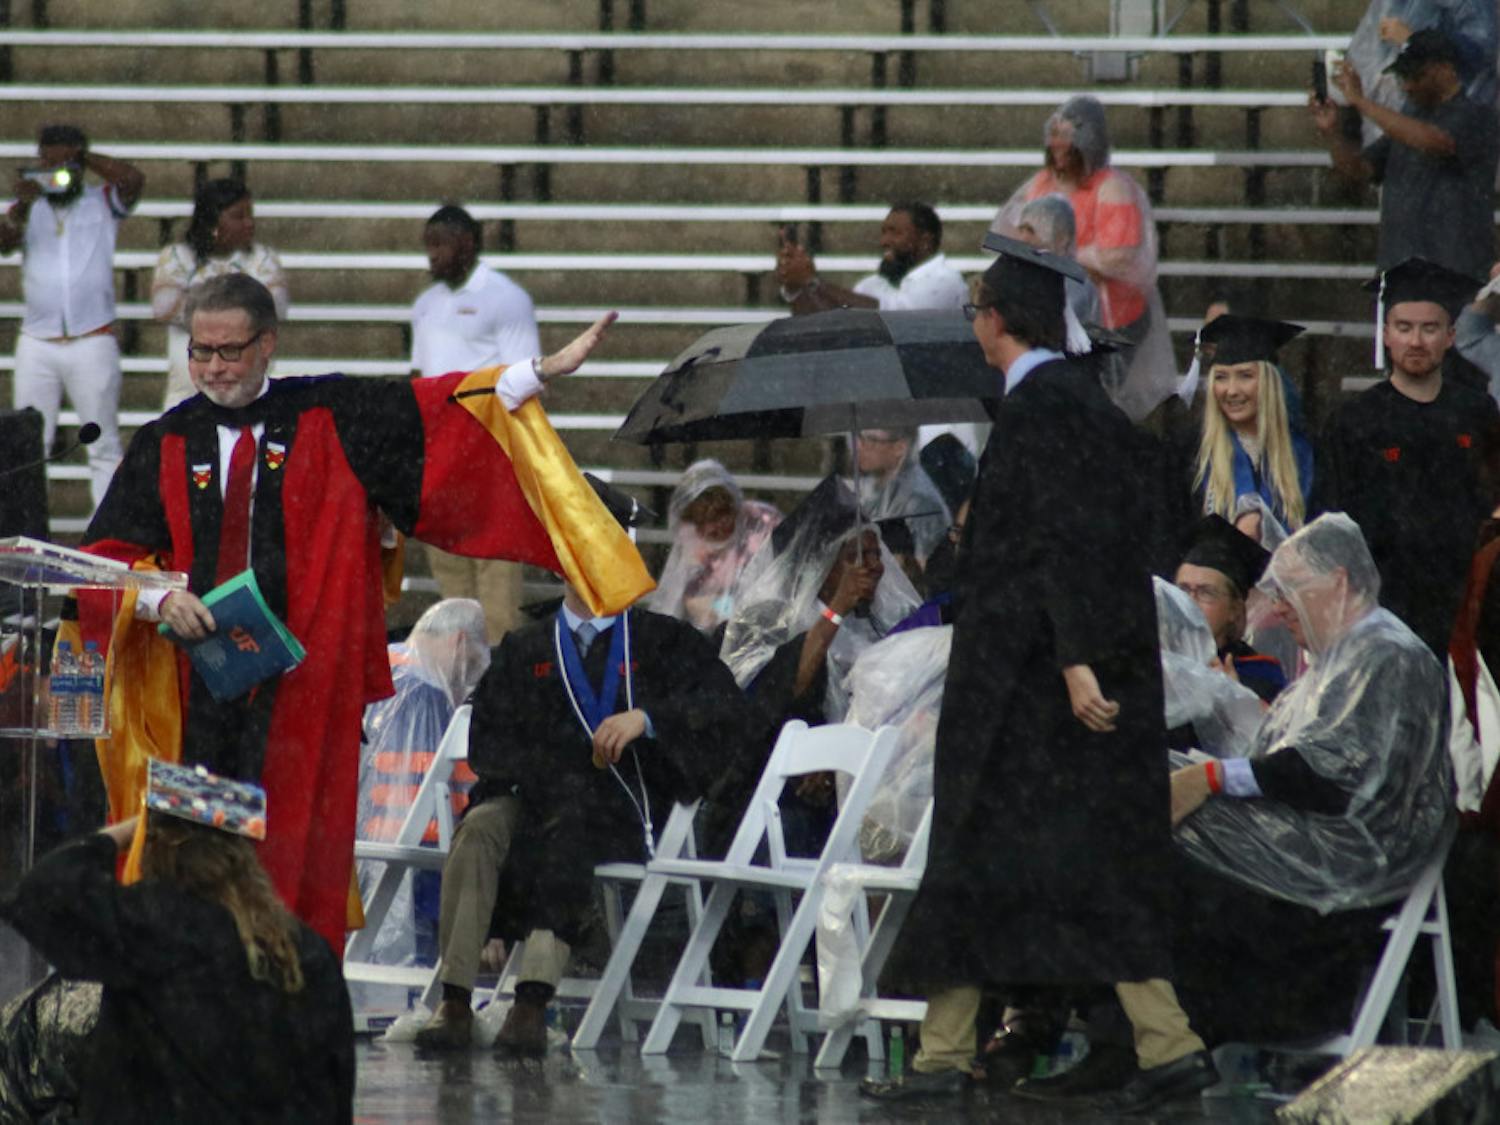 College of Liberal Arts and Sciences Dean, David Richardson, gestures to pause the commencement ceremony. Richardson announced the ceremony would be delayed by 30 minutes, but the ceremony was later moved to an insidehallway of the stadium.